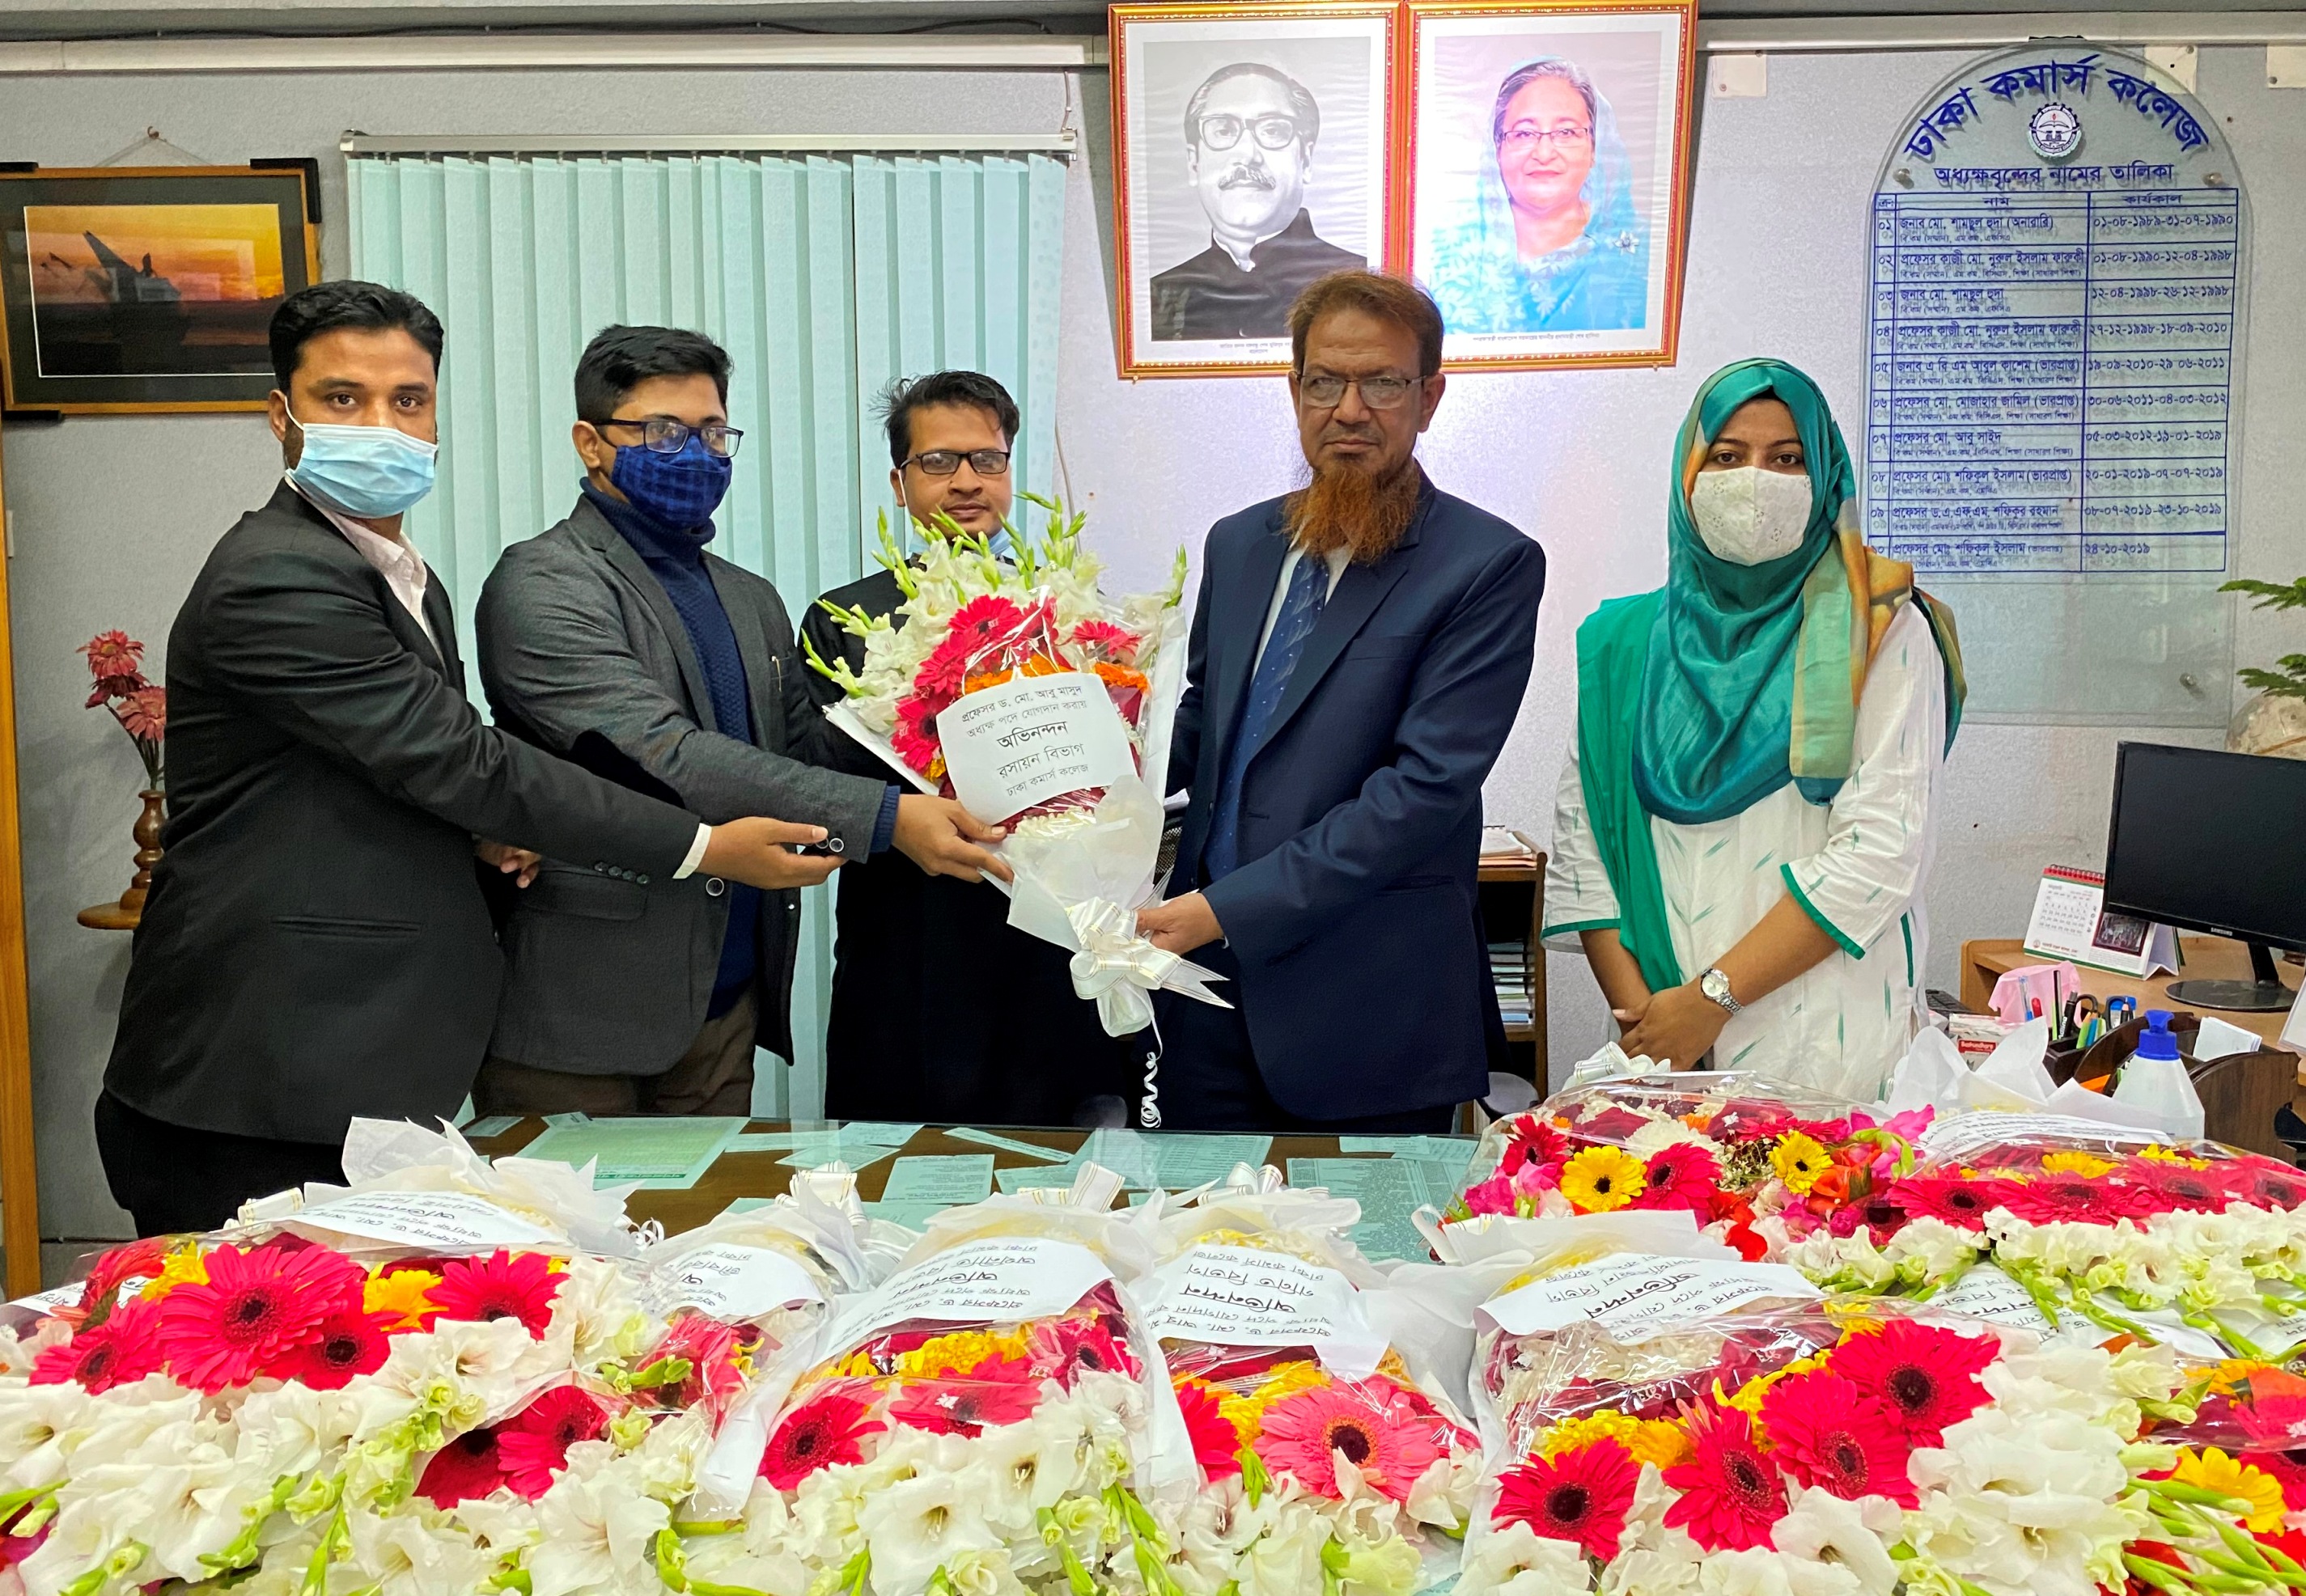 Reception to Principal Prof. Dr. Md. Abu Masud by Chemistry Department